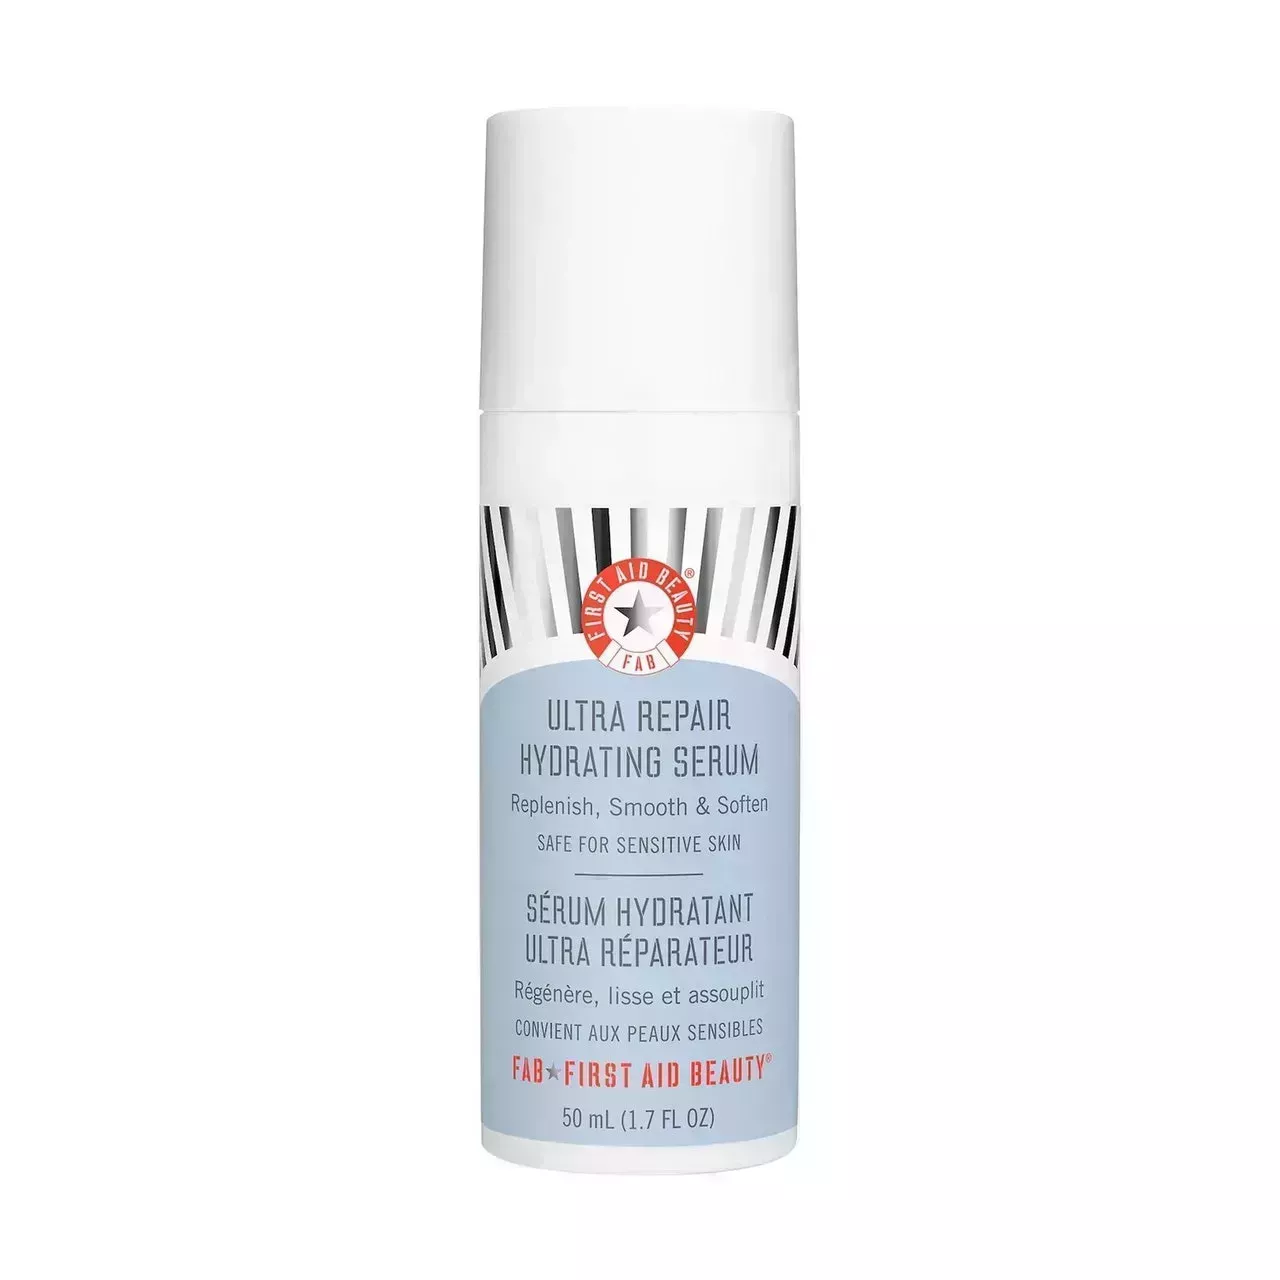 First Aid Beauty Ultra Repair Hydrating Serum on white background